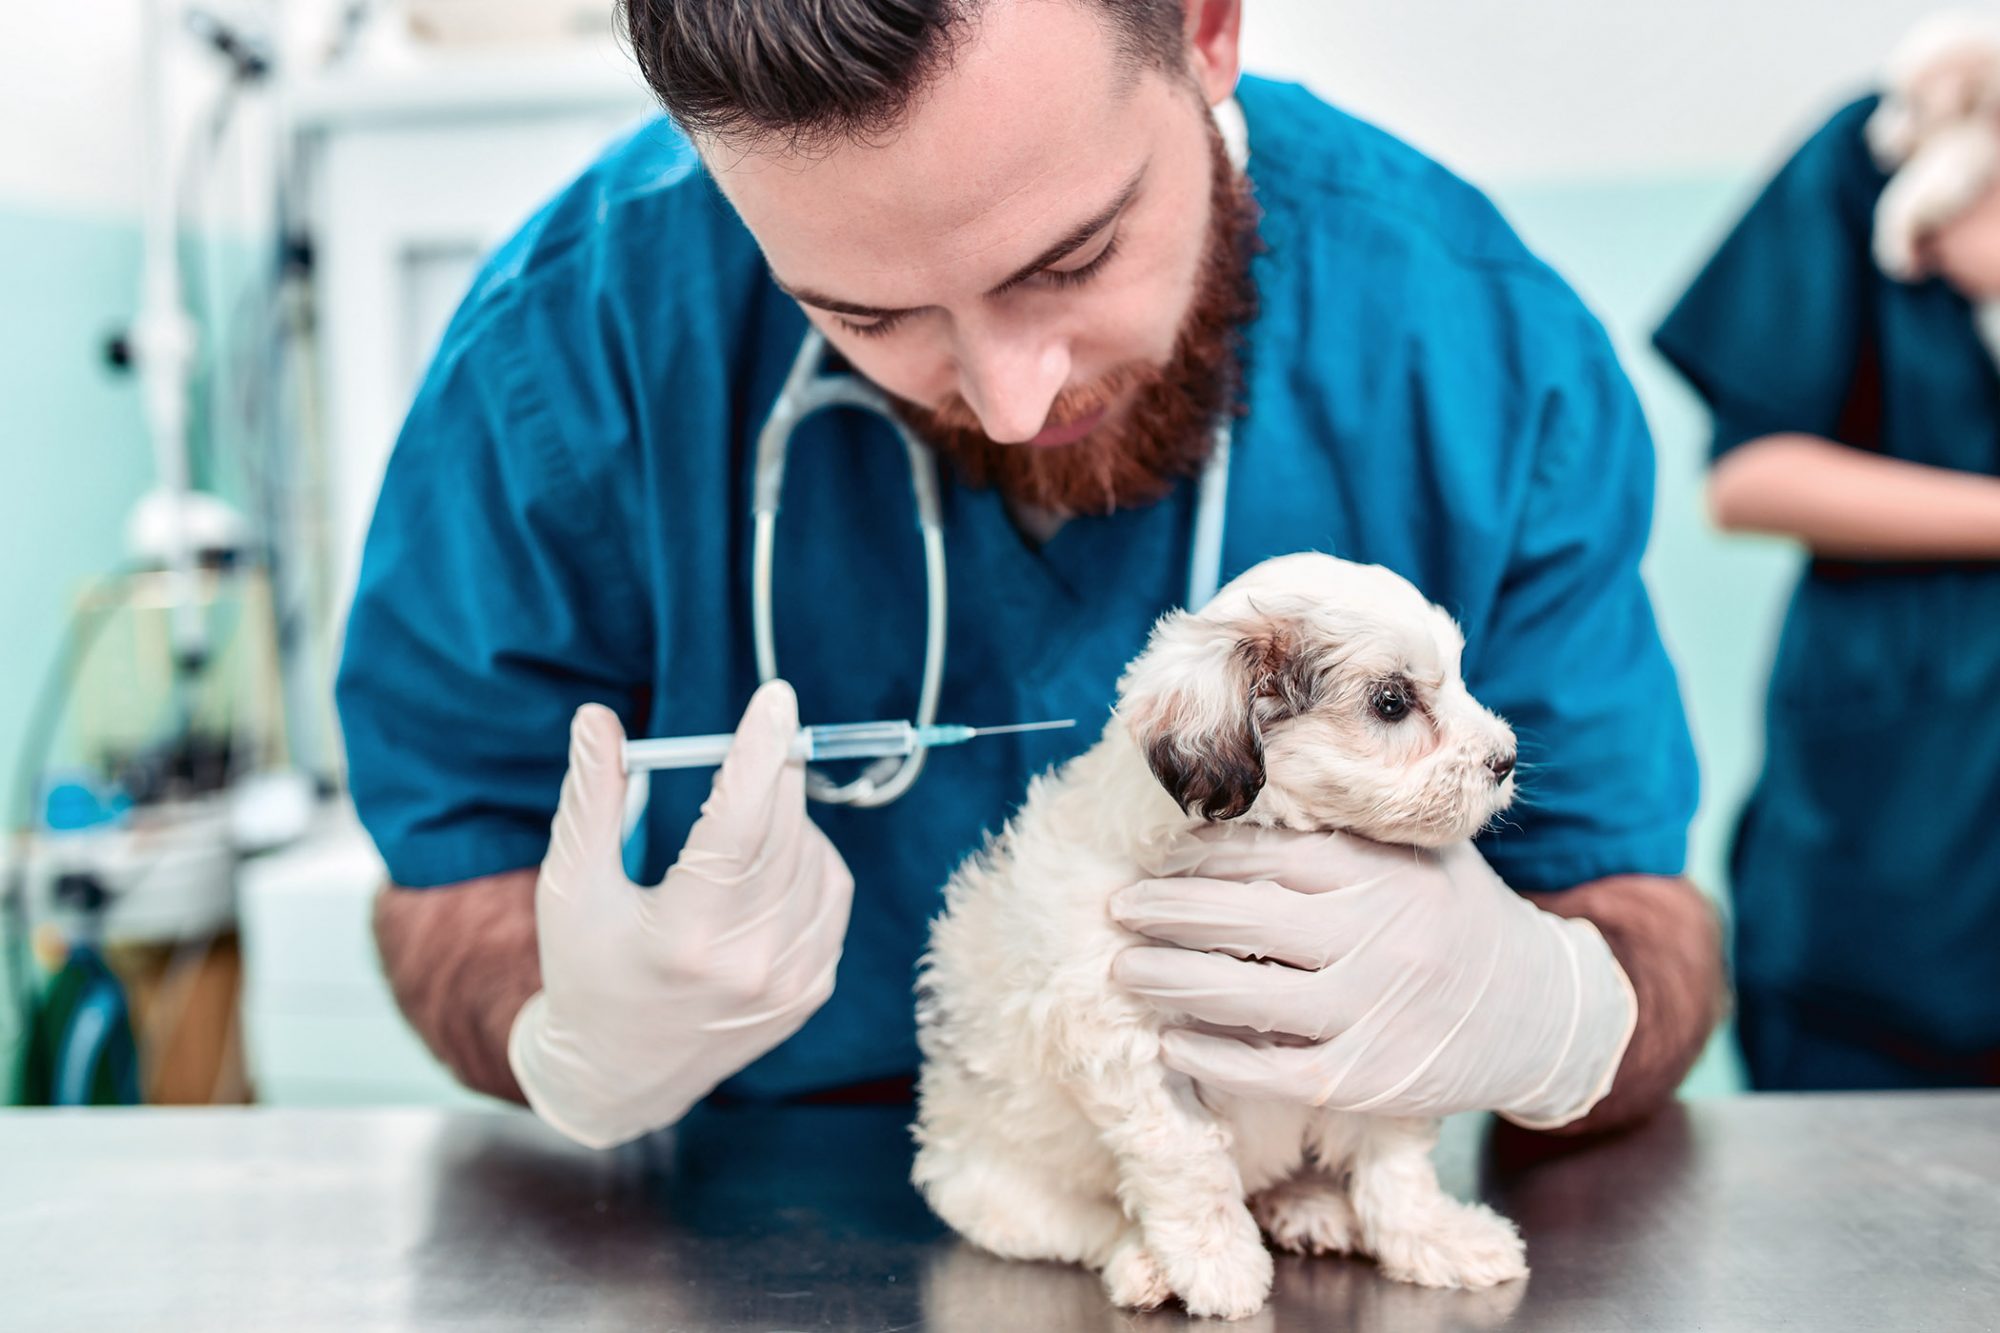 When should I get my puppy vaccinated?